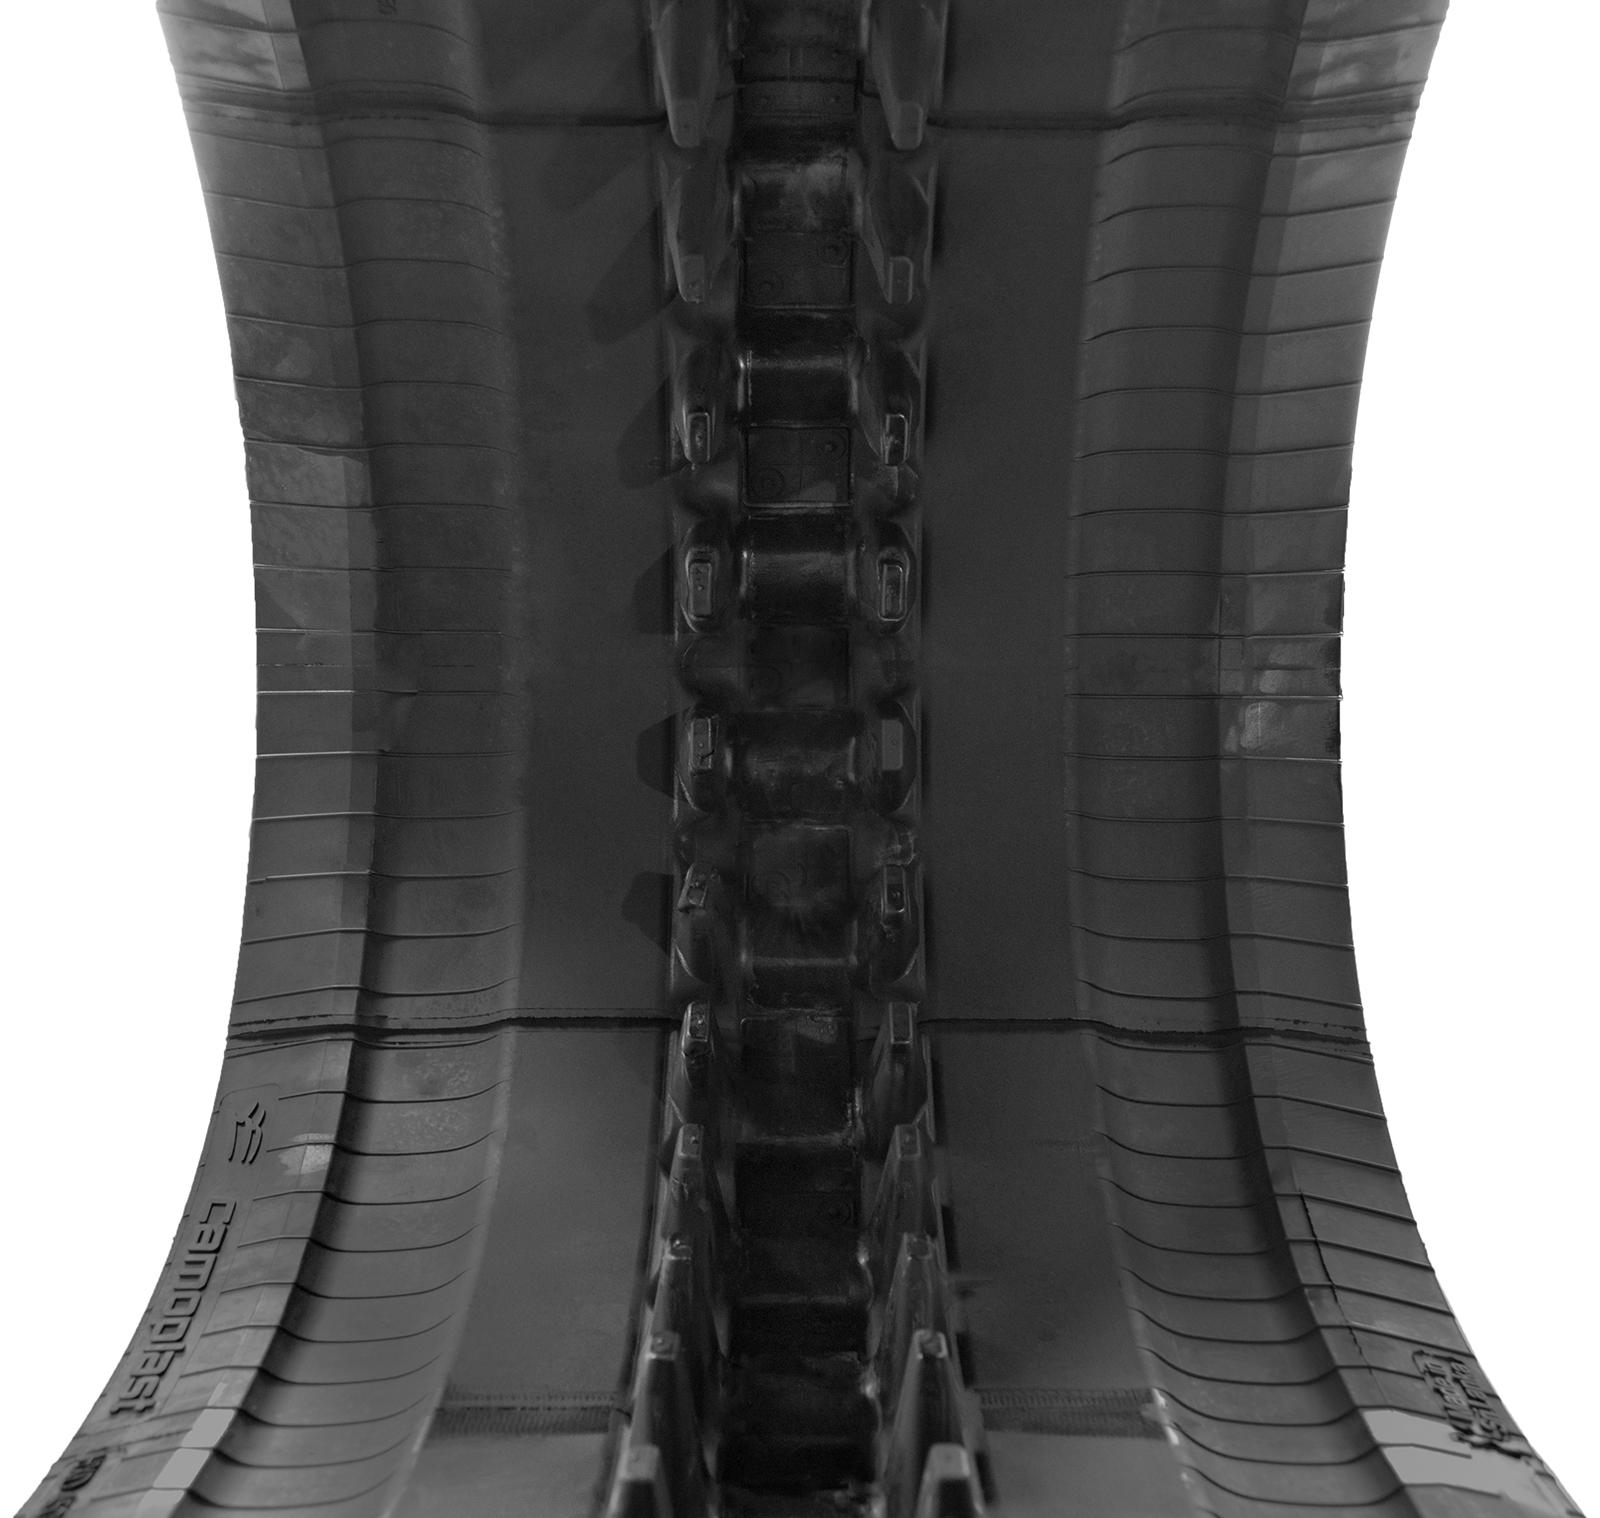 set of 2 18" camso extreme duty hxd pattern rubber tracks (450x86bx55)